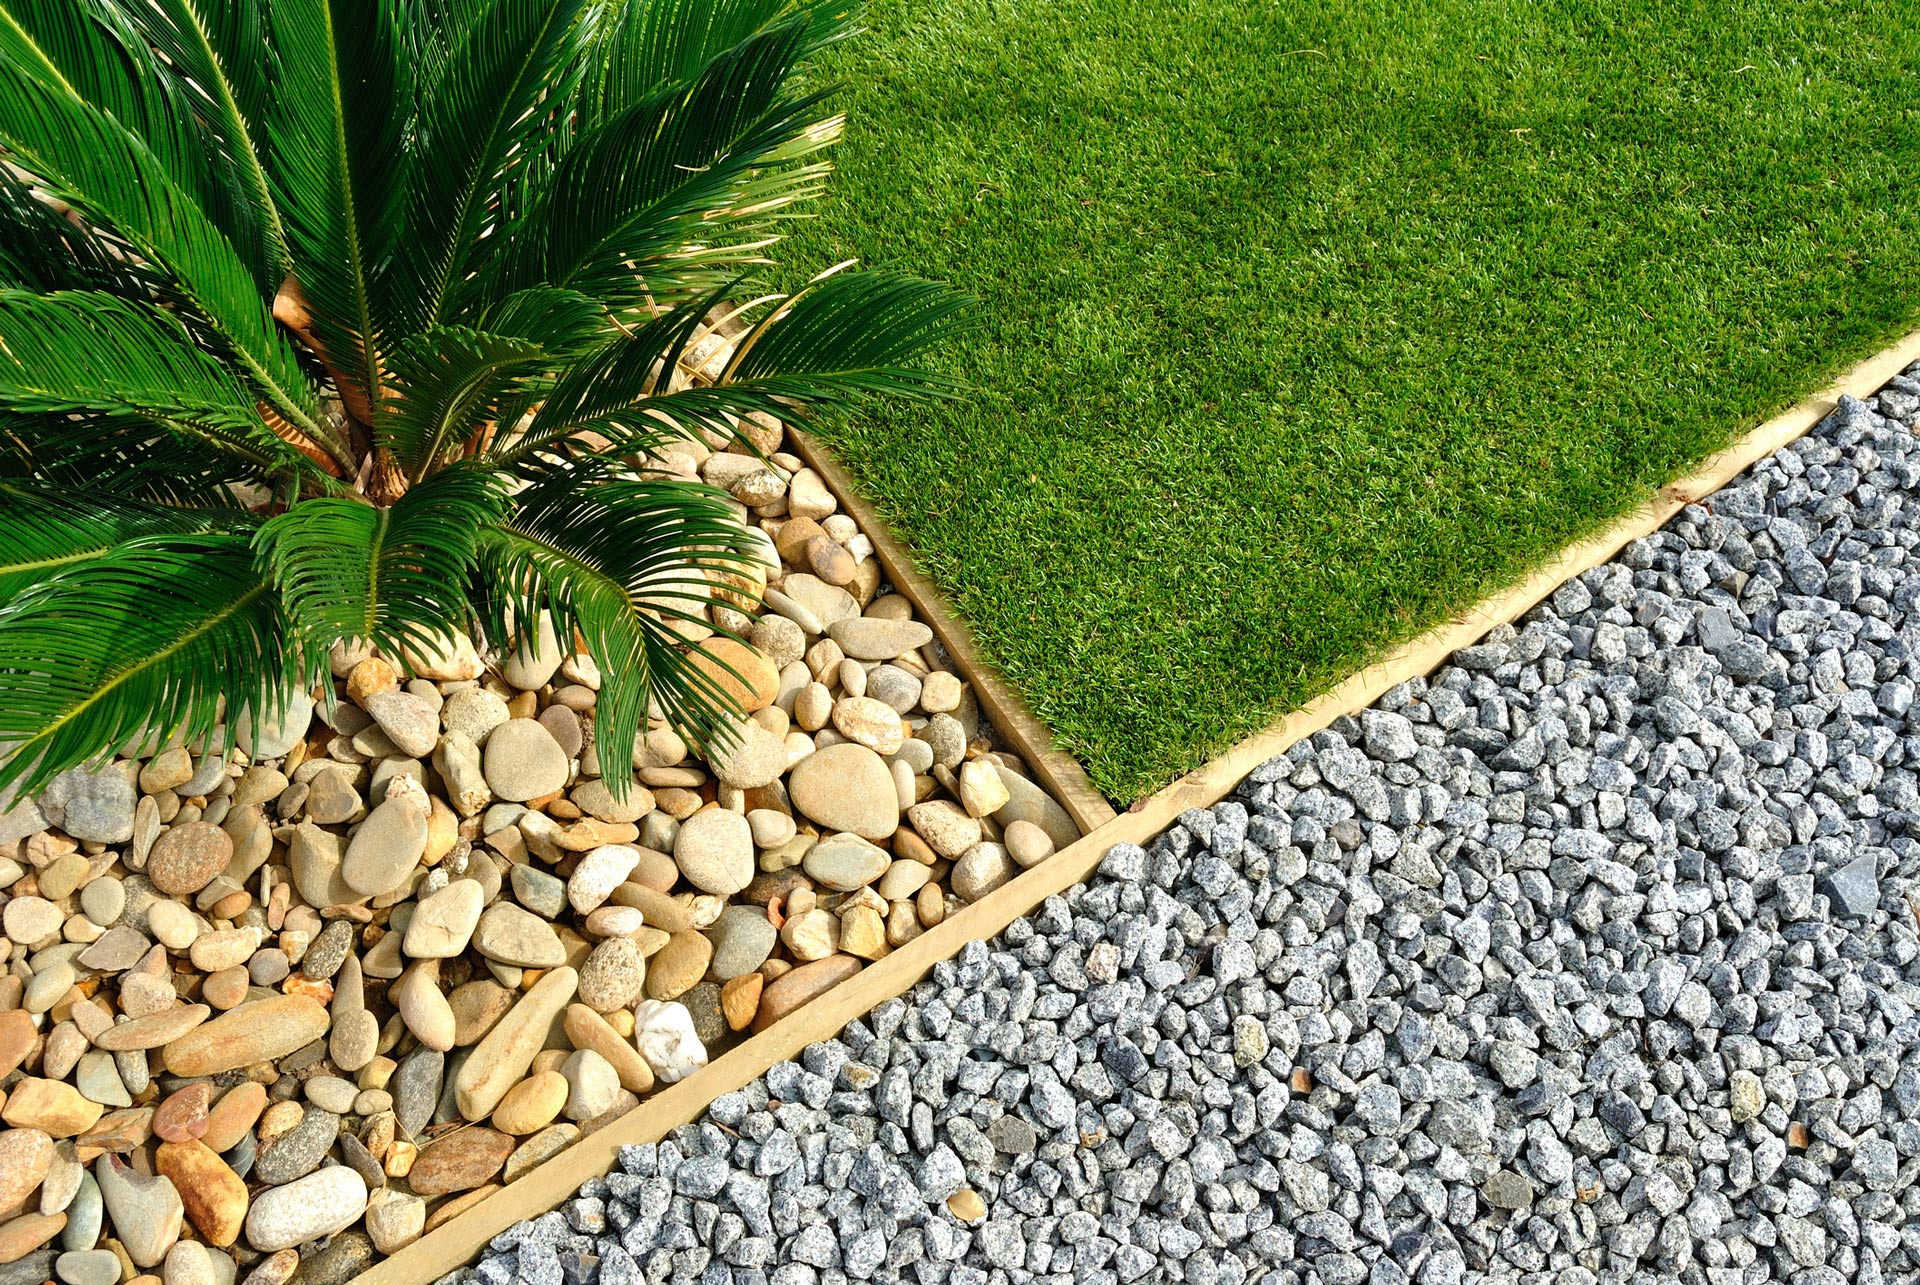 4 Common Mistakes Made During Sod Installation